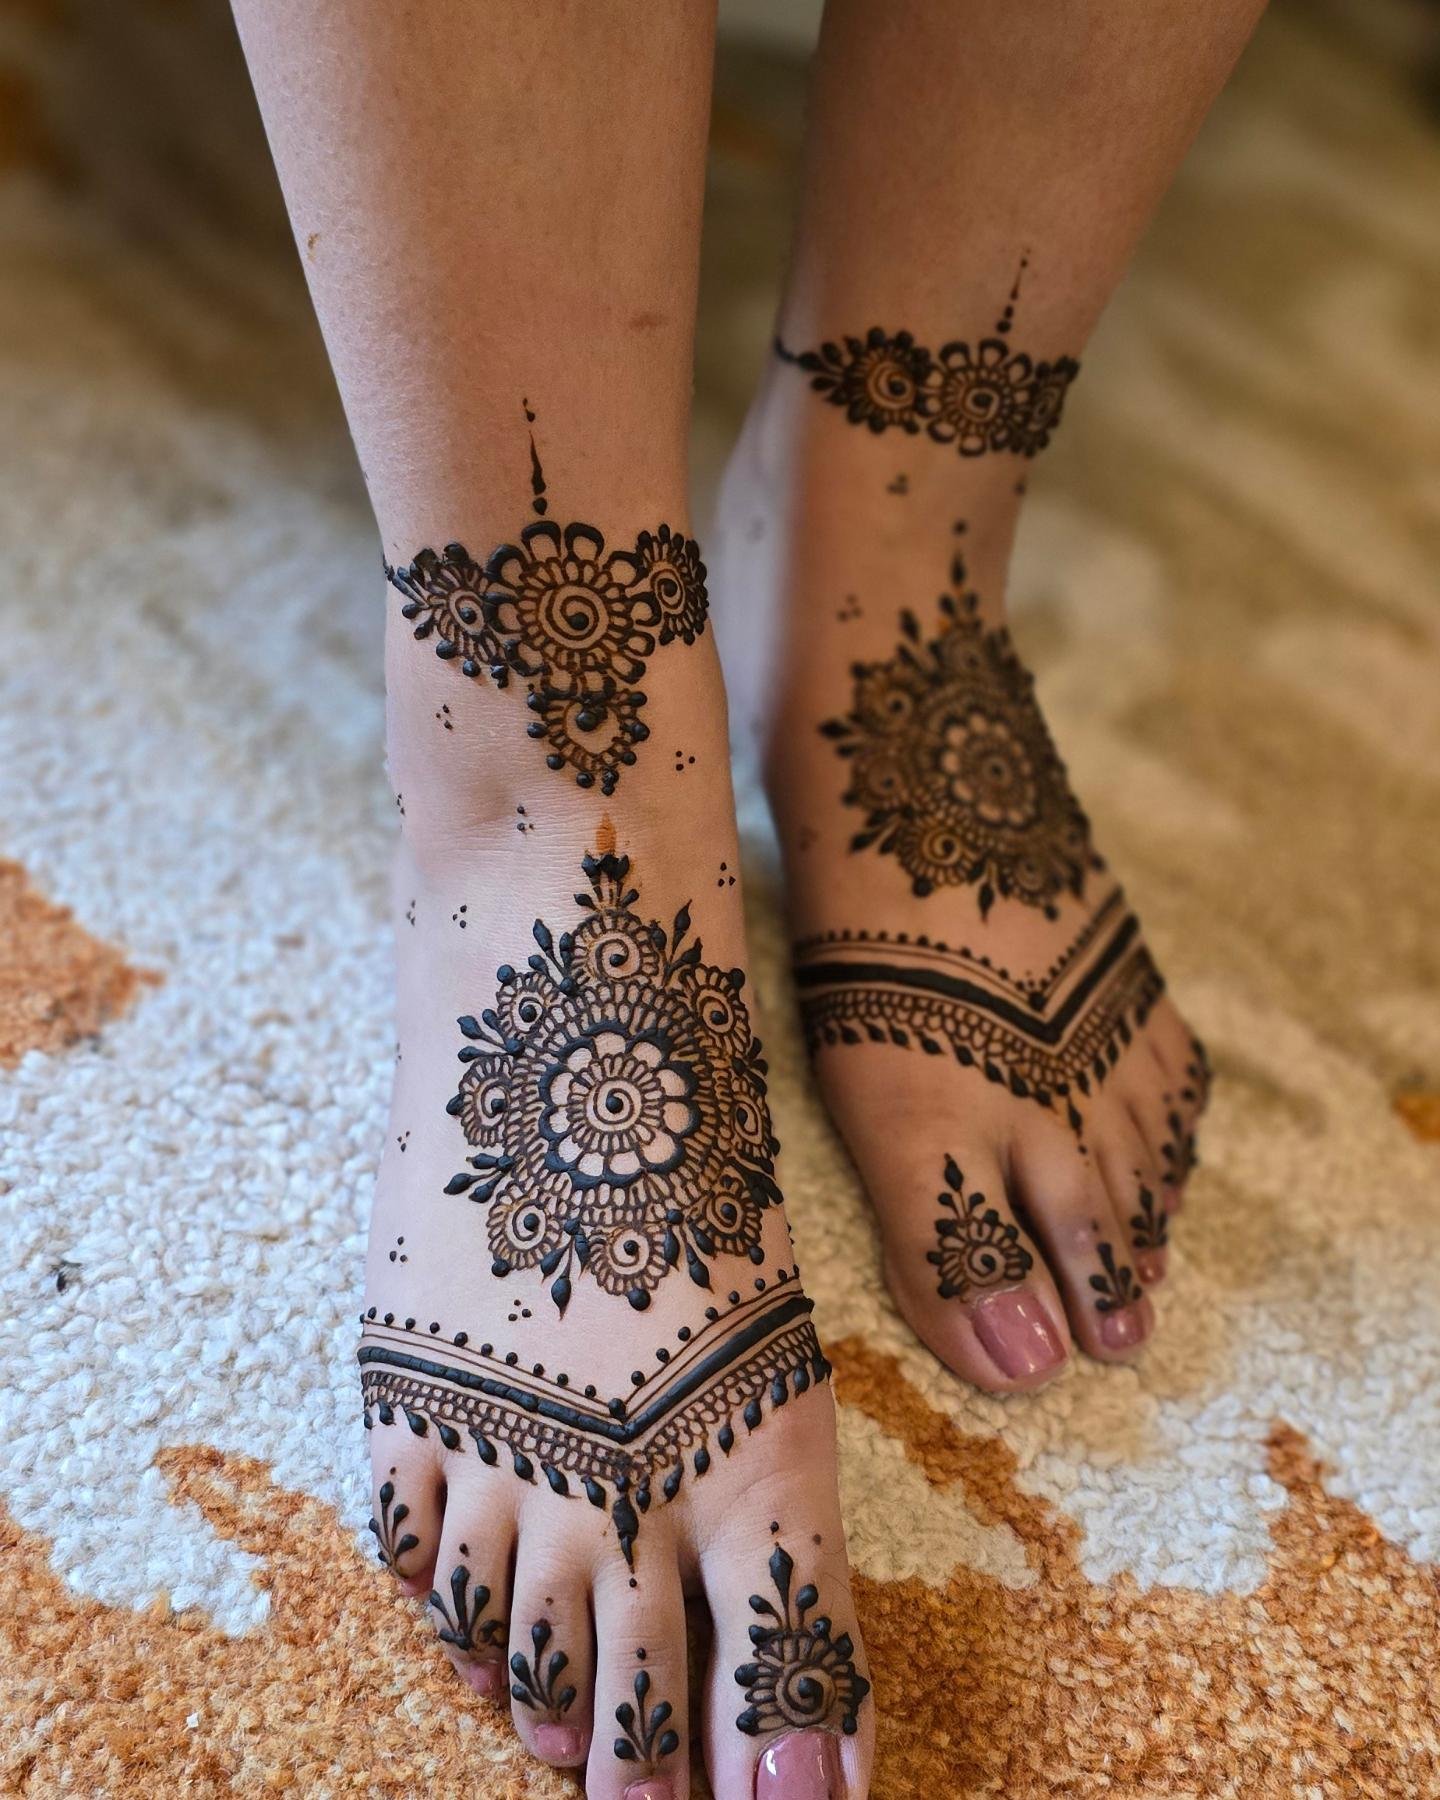 Bridal henna feet 🍀🎊
_____________________________________
✿ Booking Open for 2024 &amp; 2025✿~
📩email for bookings/inquiries 
neetithakor@gmail.com
~Call/Whatsapp : +1 4087919065
💻 Check out more details on my website
www.hennabyneeti.com
______